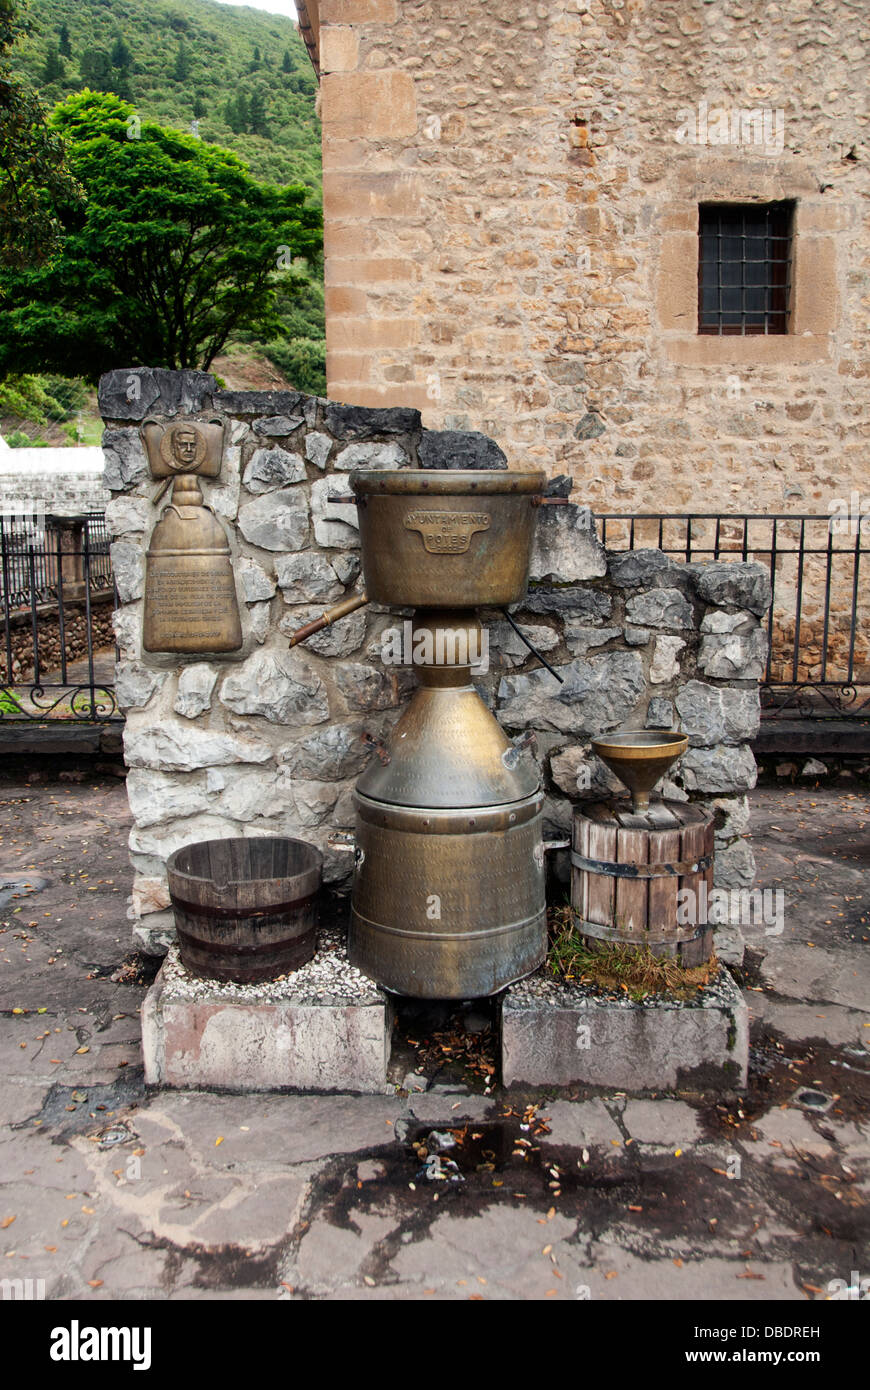 SPAIN; CANTABRIA; POTES; TOWN WATER SUPPLY (COURTESY OF ALFONSO CUEVAS MEMORIAL) Stock Photo